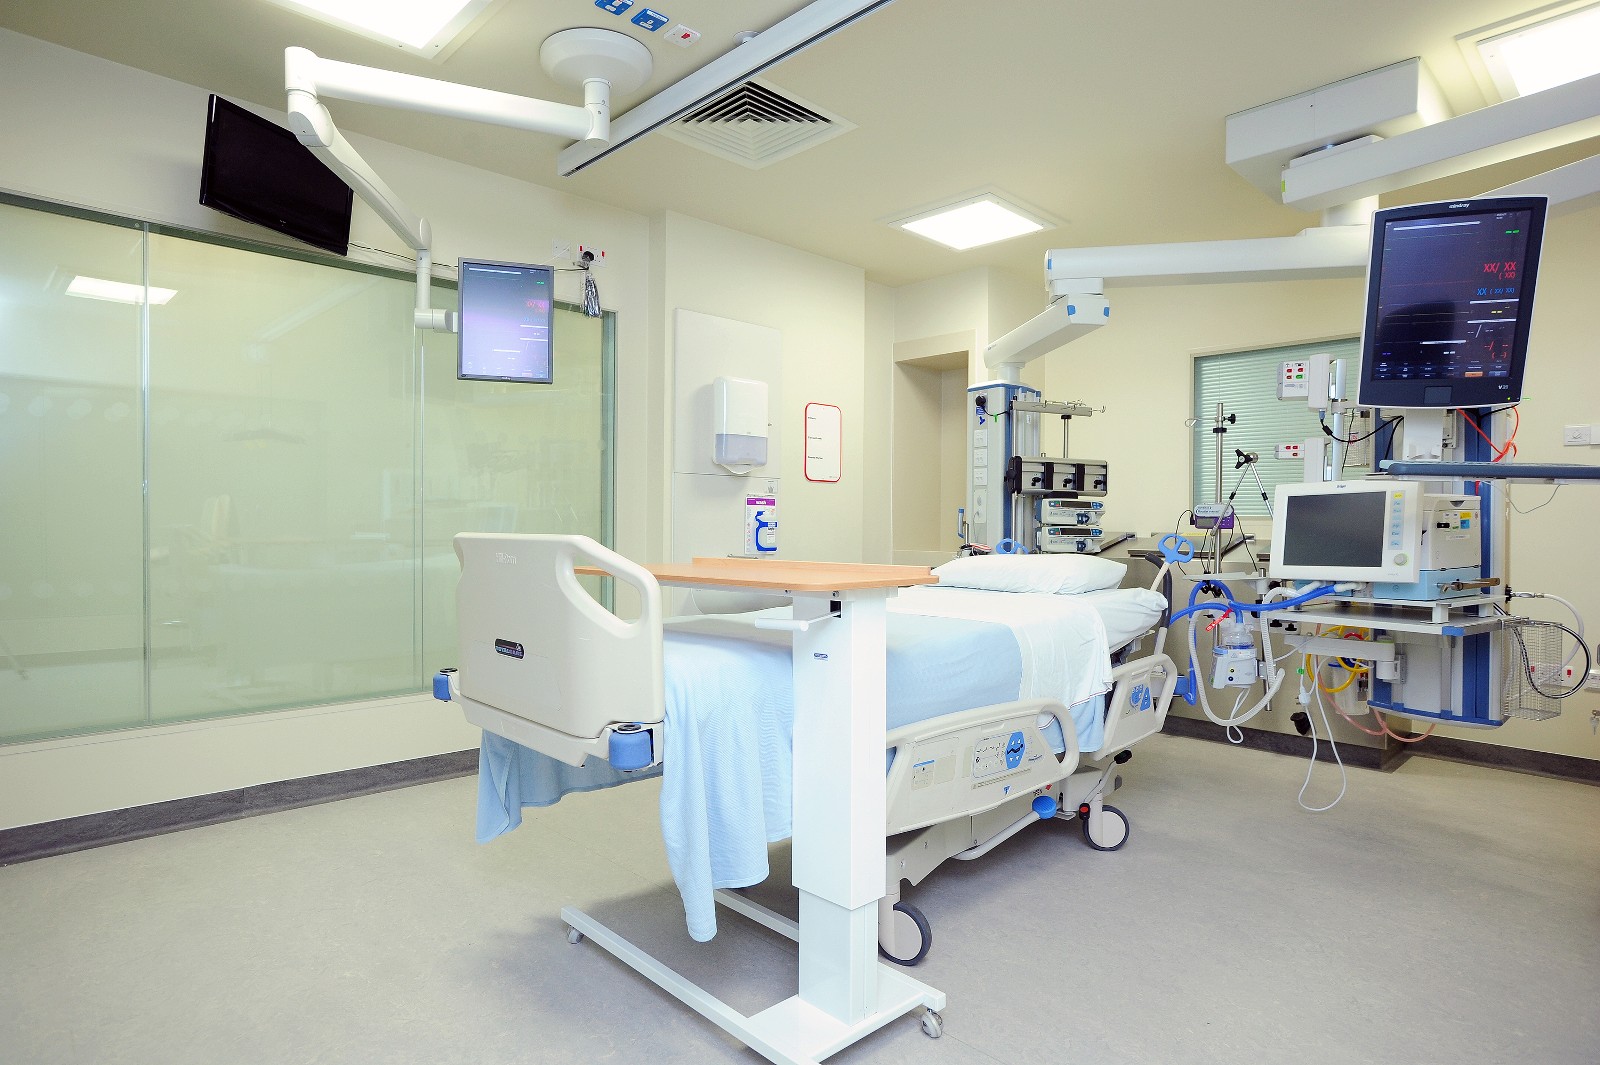 Switchable Glass in a Hospital